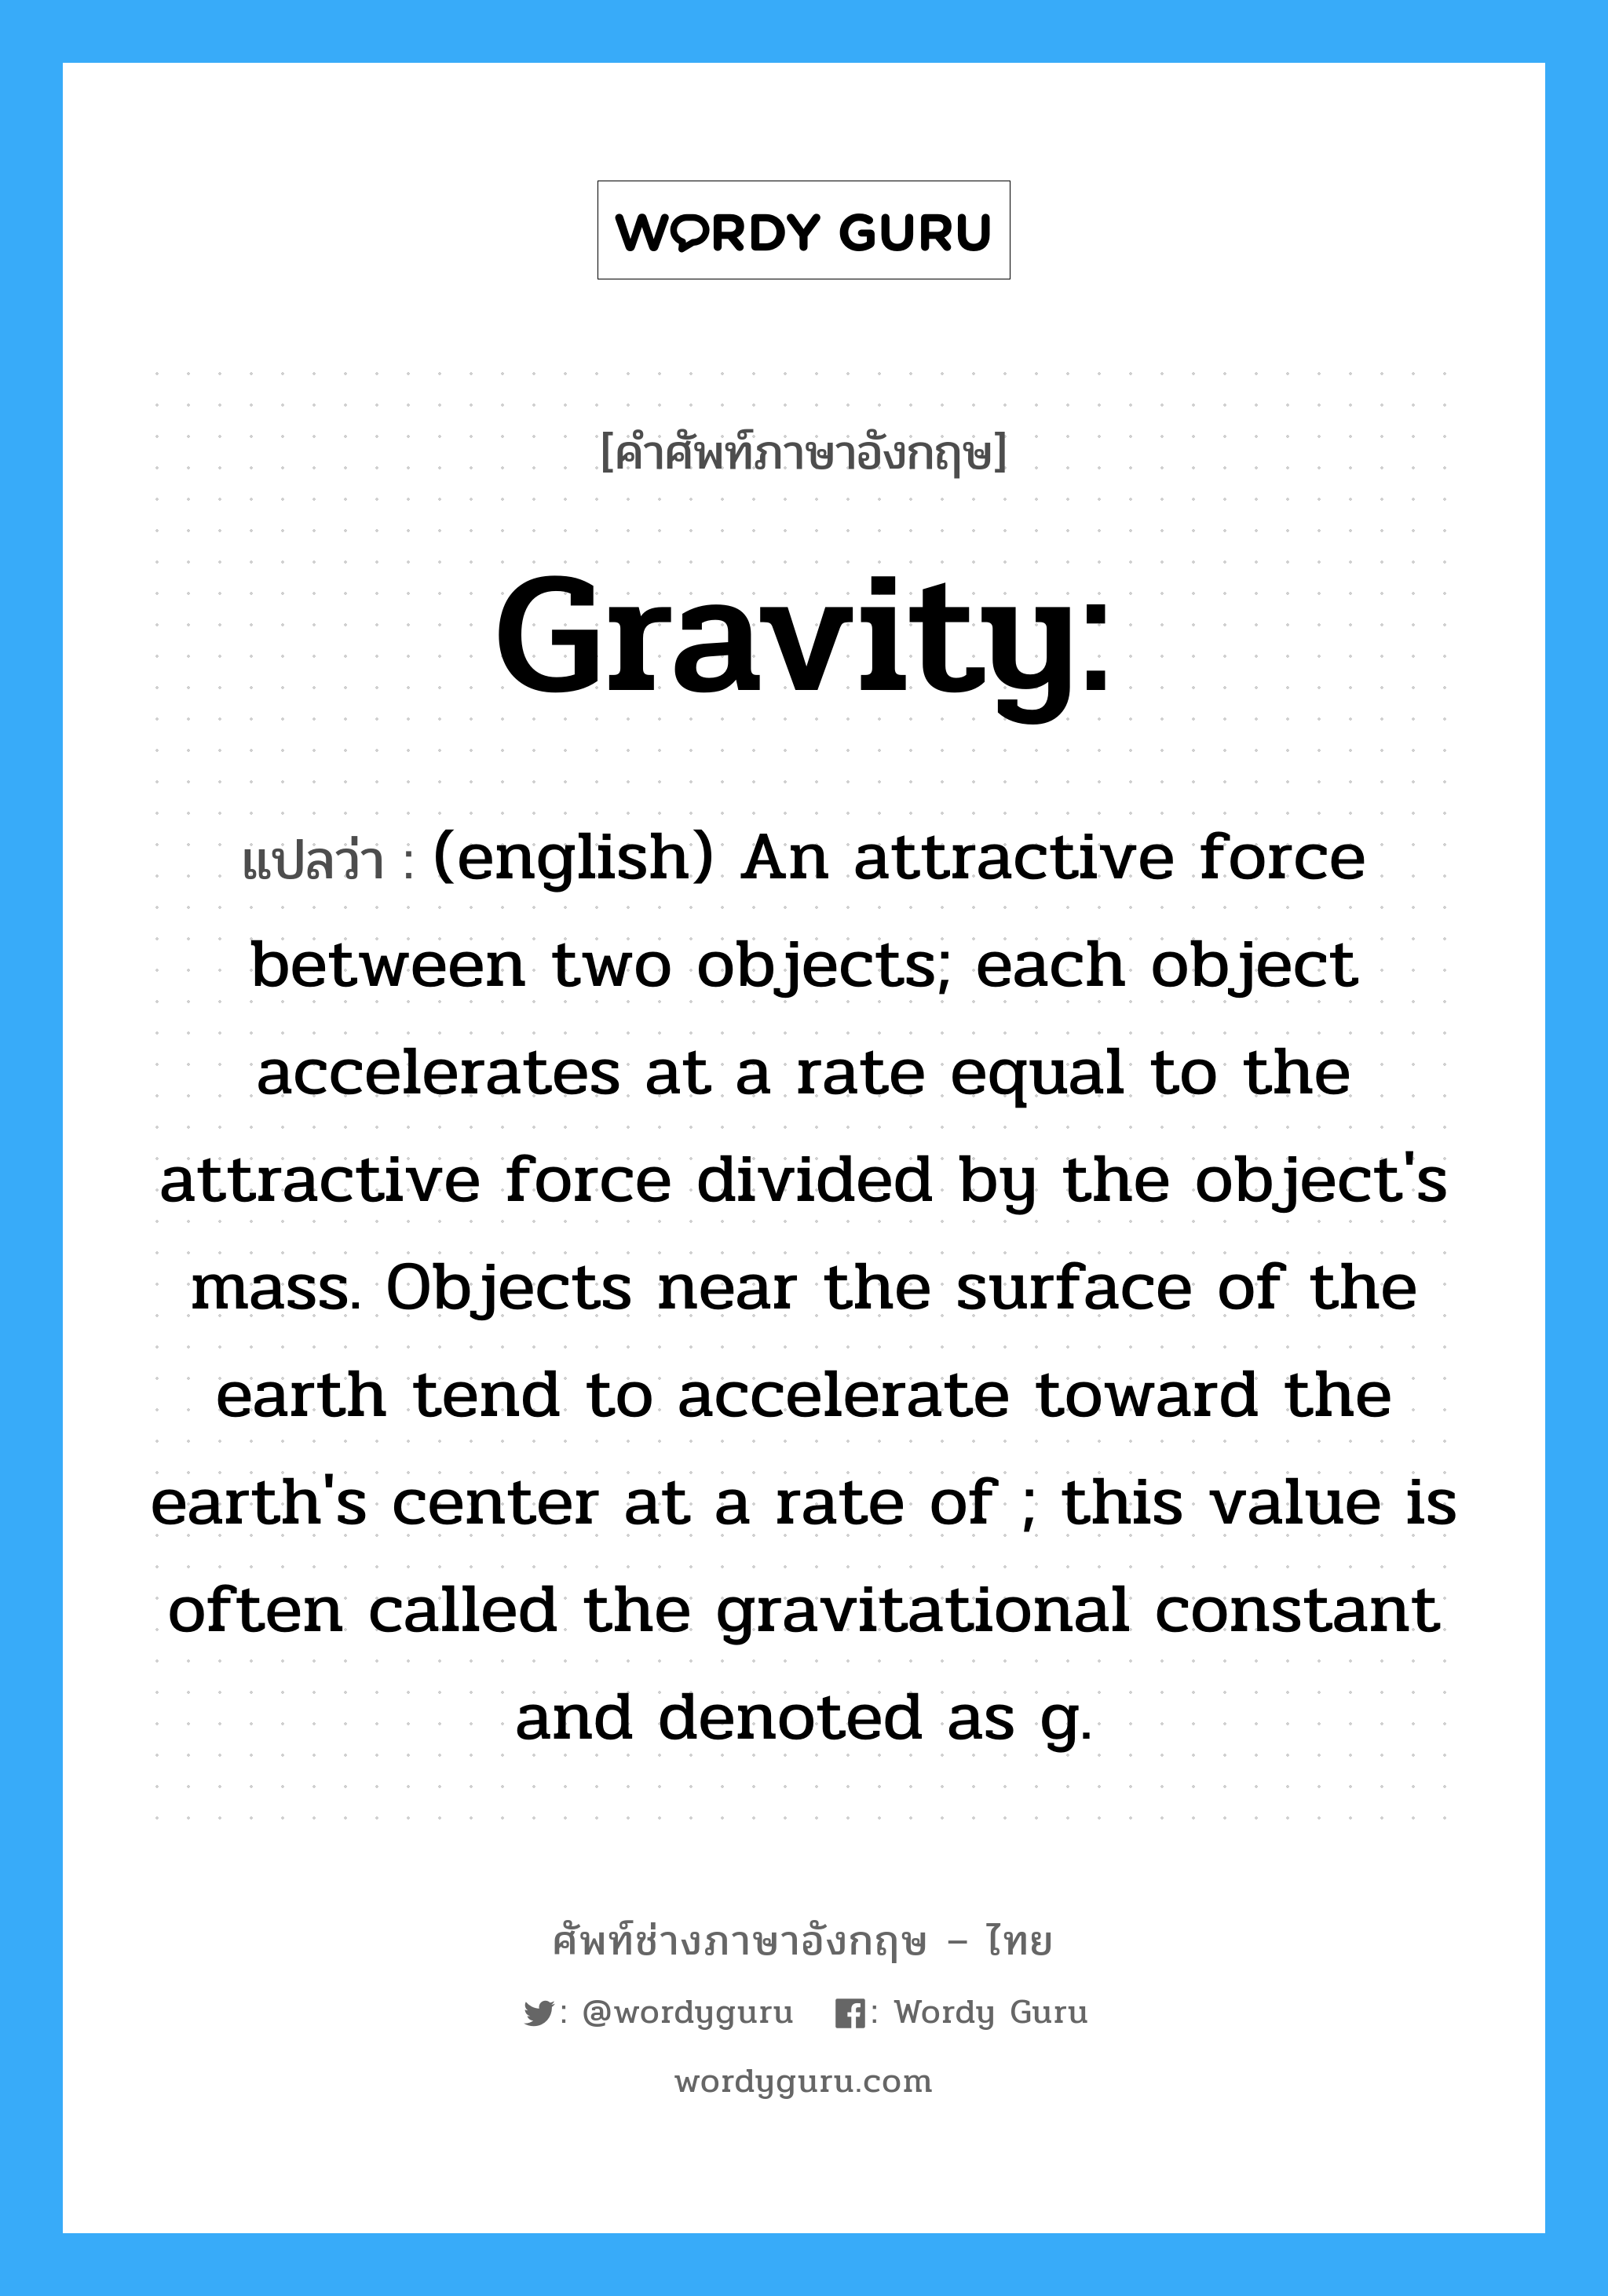 gravity แปลว่า?, คำศัพท์ช่างภาษาอังกฤษ - ไทย Gravity: คำศัพท์ภาษาอังกฤษ Gravity: แปลว่า (english) An attractive force between two objects; each object accelerates at a rate equal to the attractive force divided by the object's mass. Objects near the surface of the earth tend to accelerate toward the earth's center at a rate of ; this value is often called the gravitational constant and denoted as g.